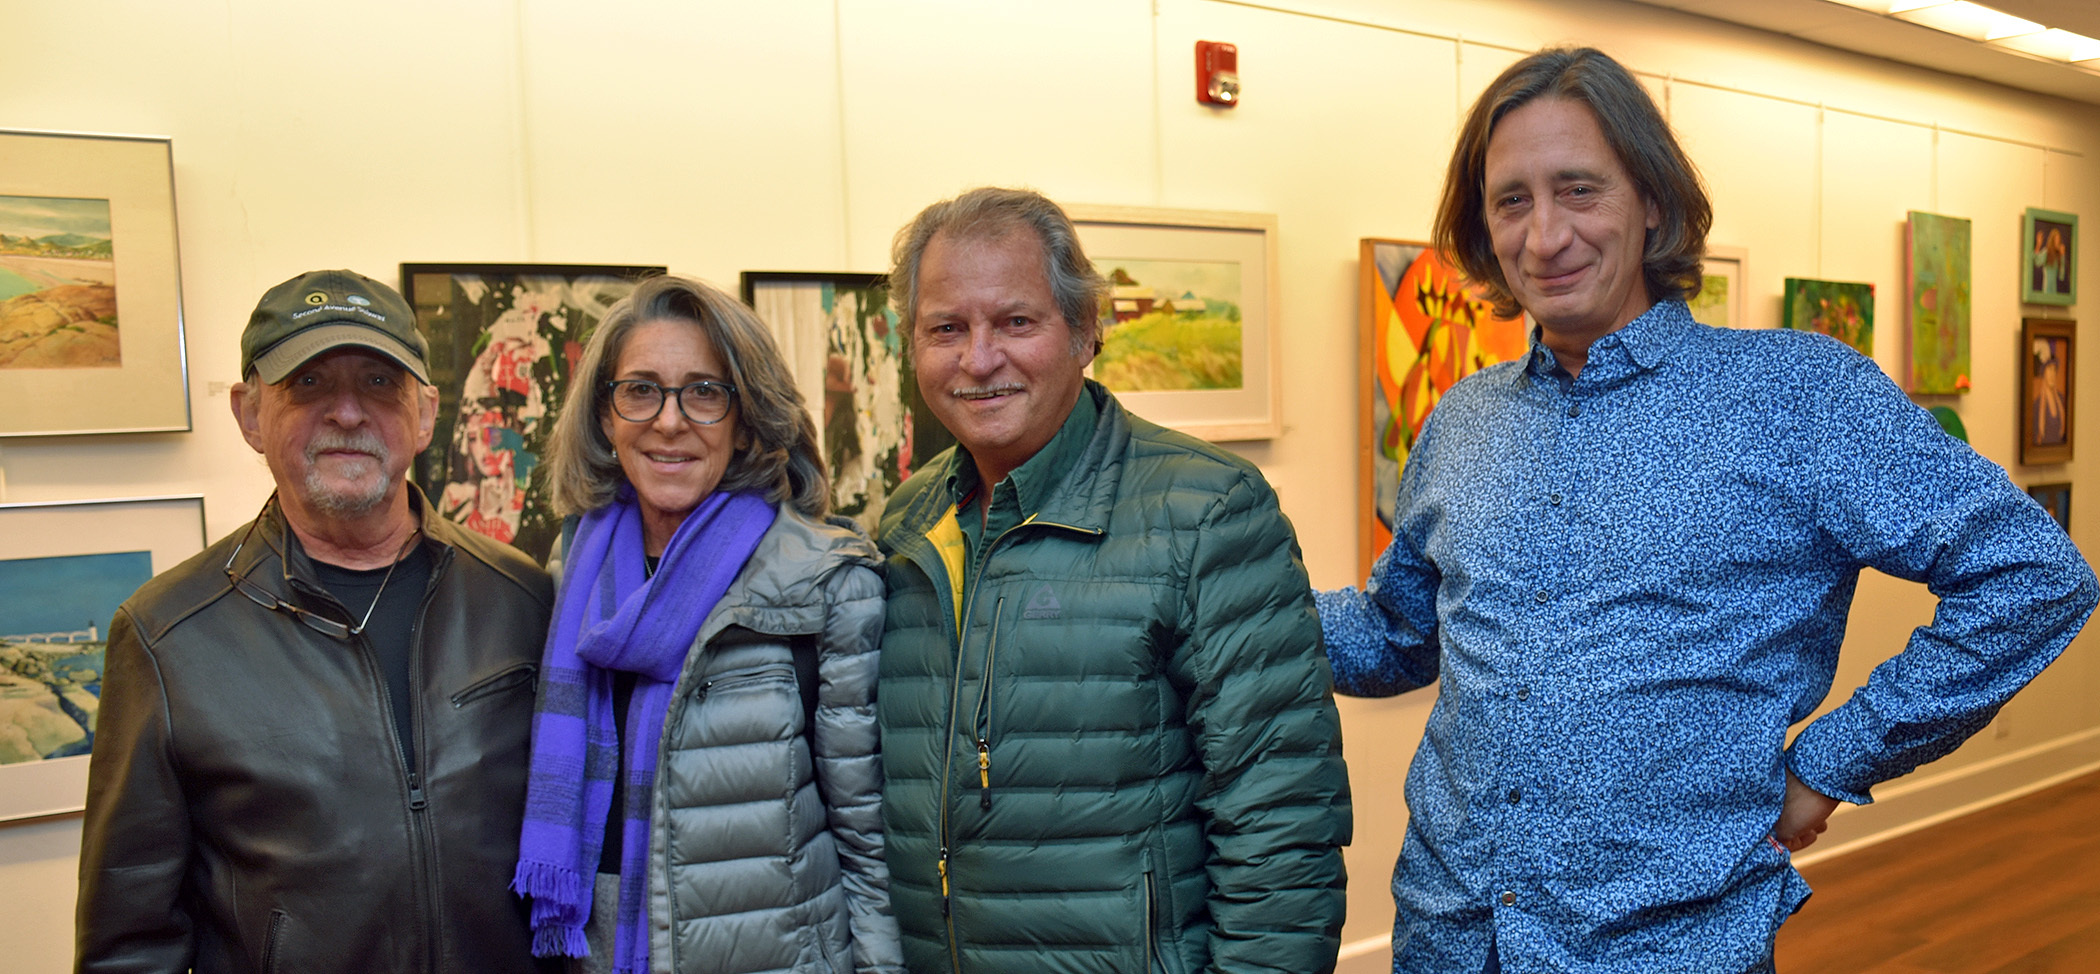 The Southampton Artists Association had a great turnout for its fall show at the Cultural Center in Southampton last weekend. From left, participating artists Jim Slezak, Jody Cukier, Matthew DiBernardo and Paul Dempsey.